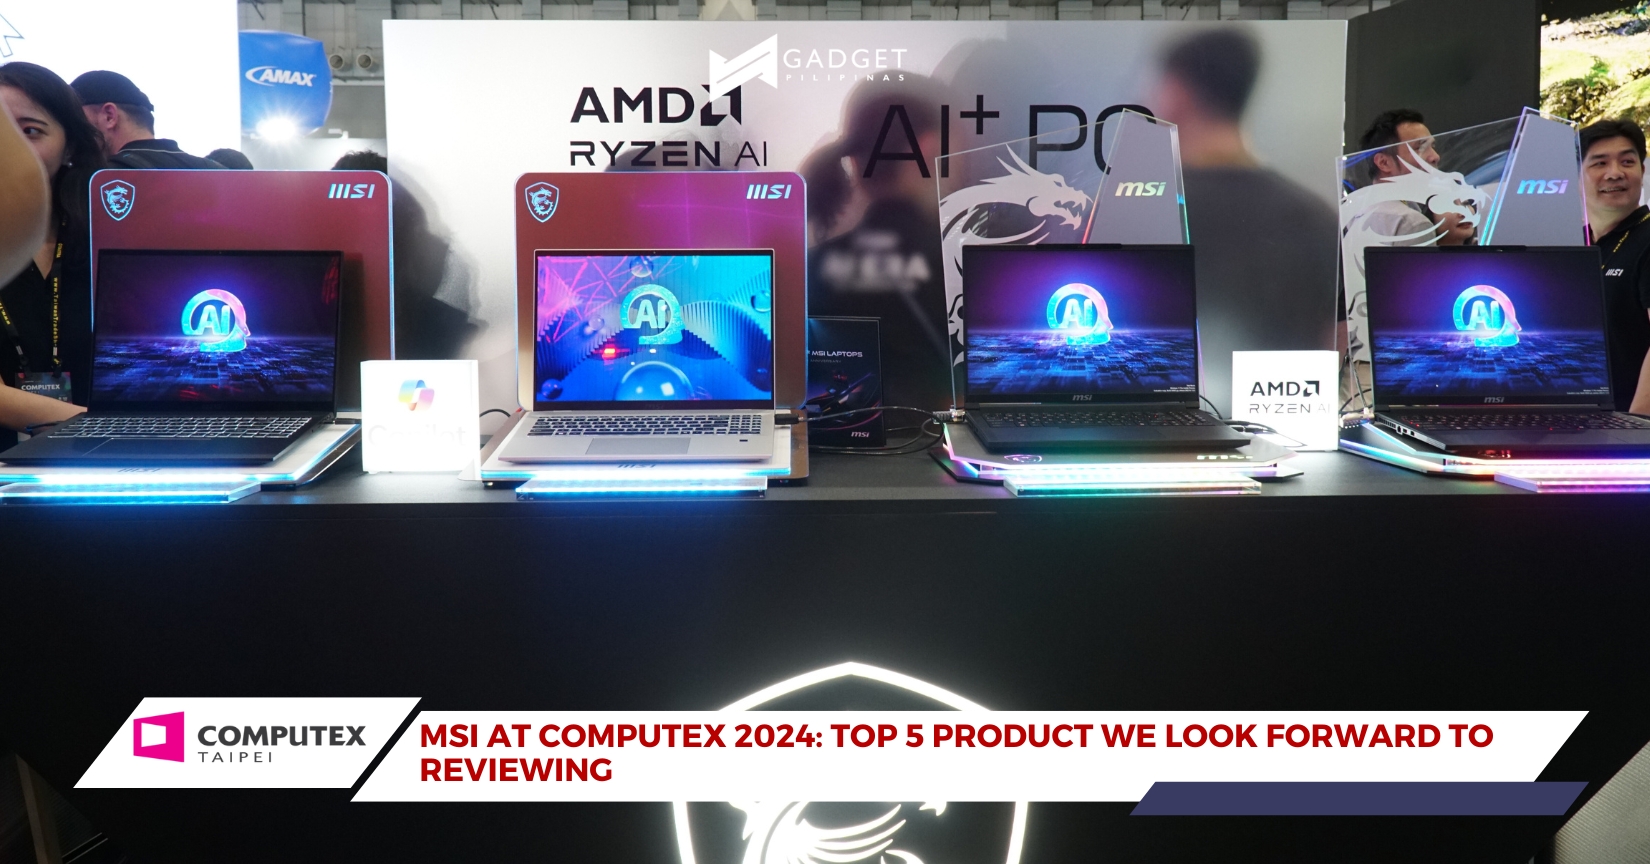 MSI at Computex 2024: TOP 5 Products We Look Forward to Reviewing